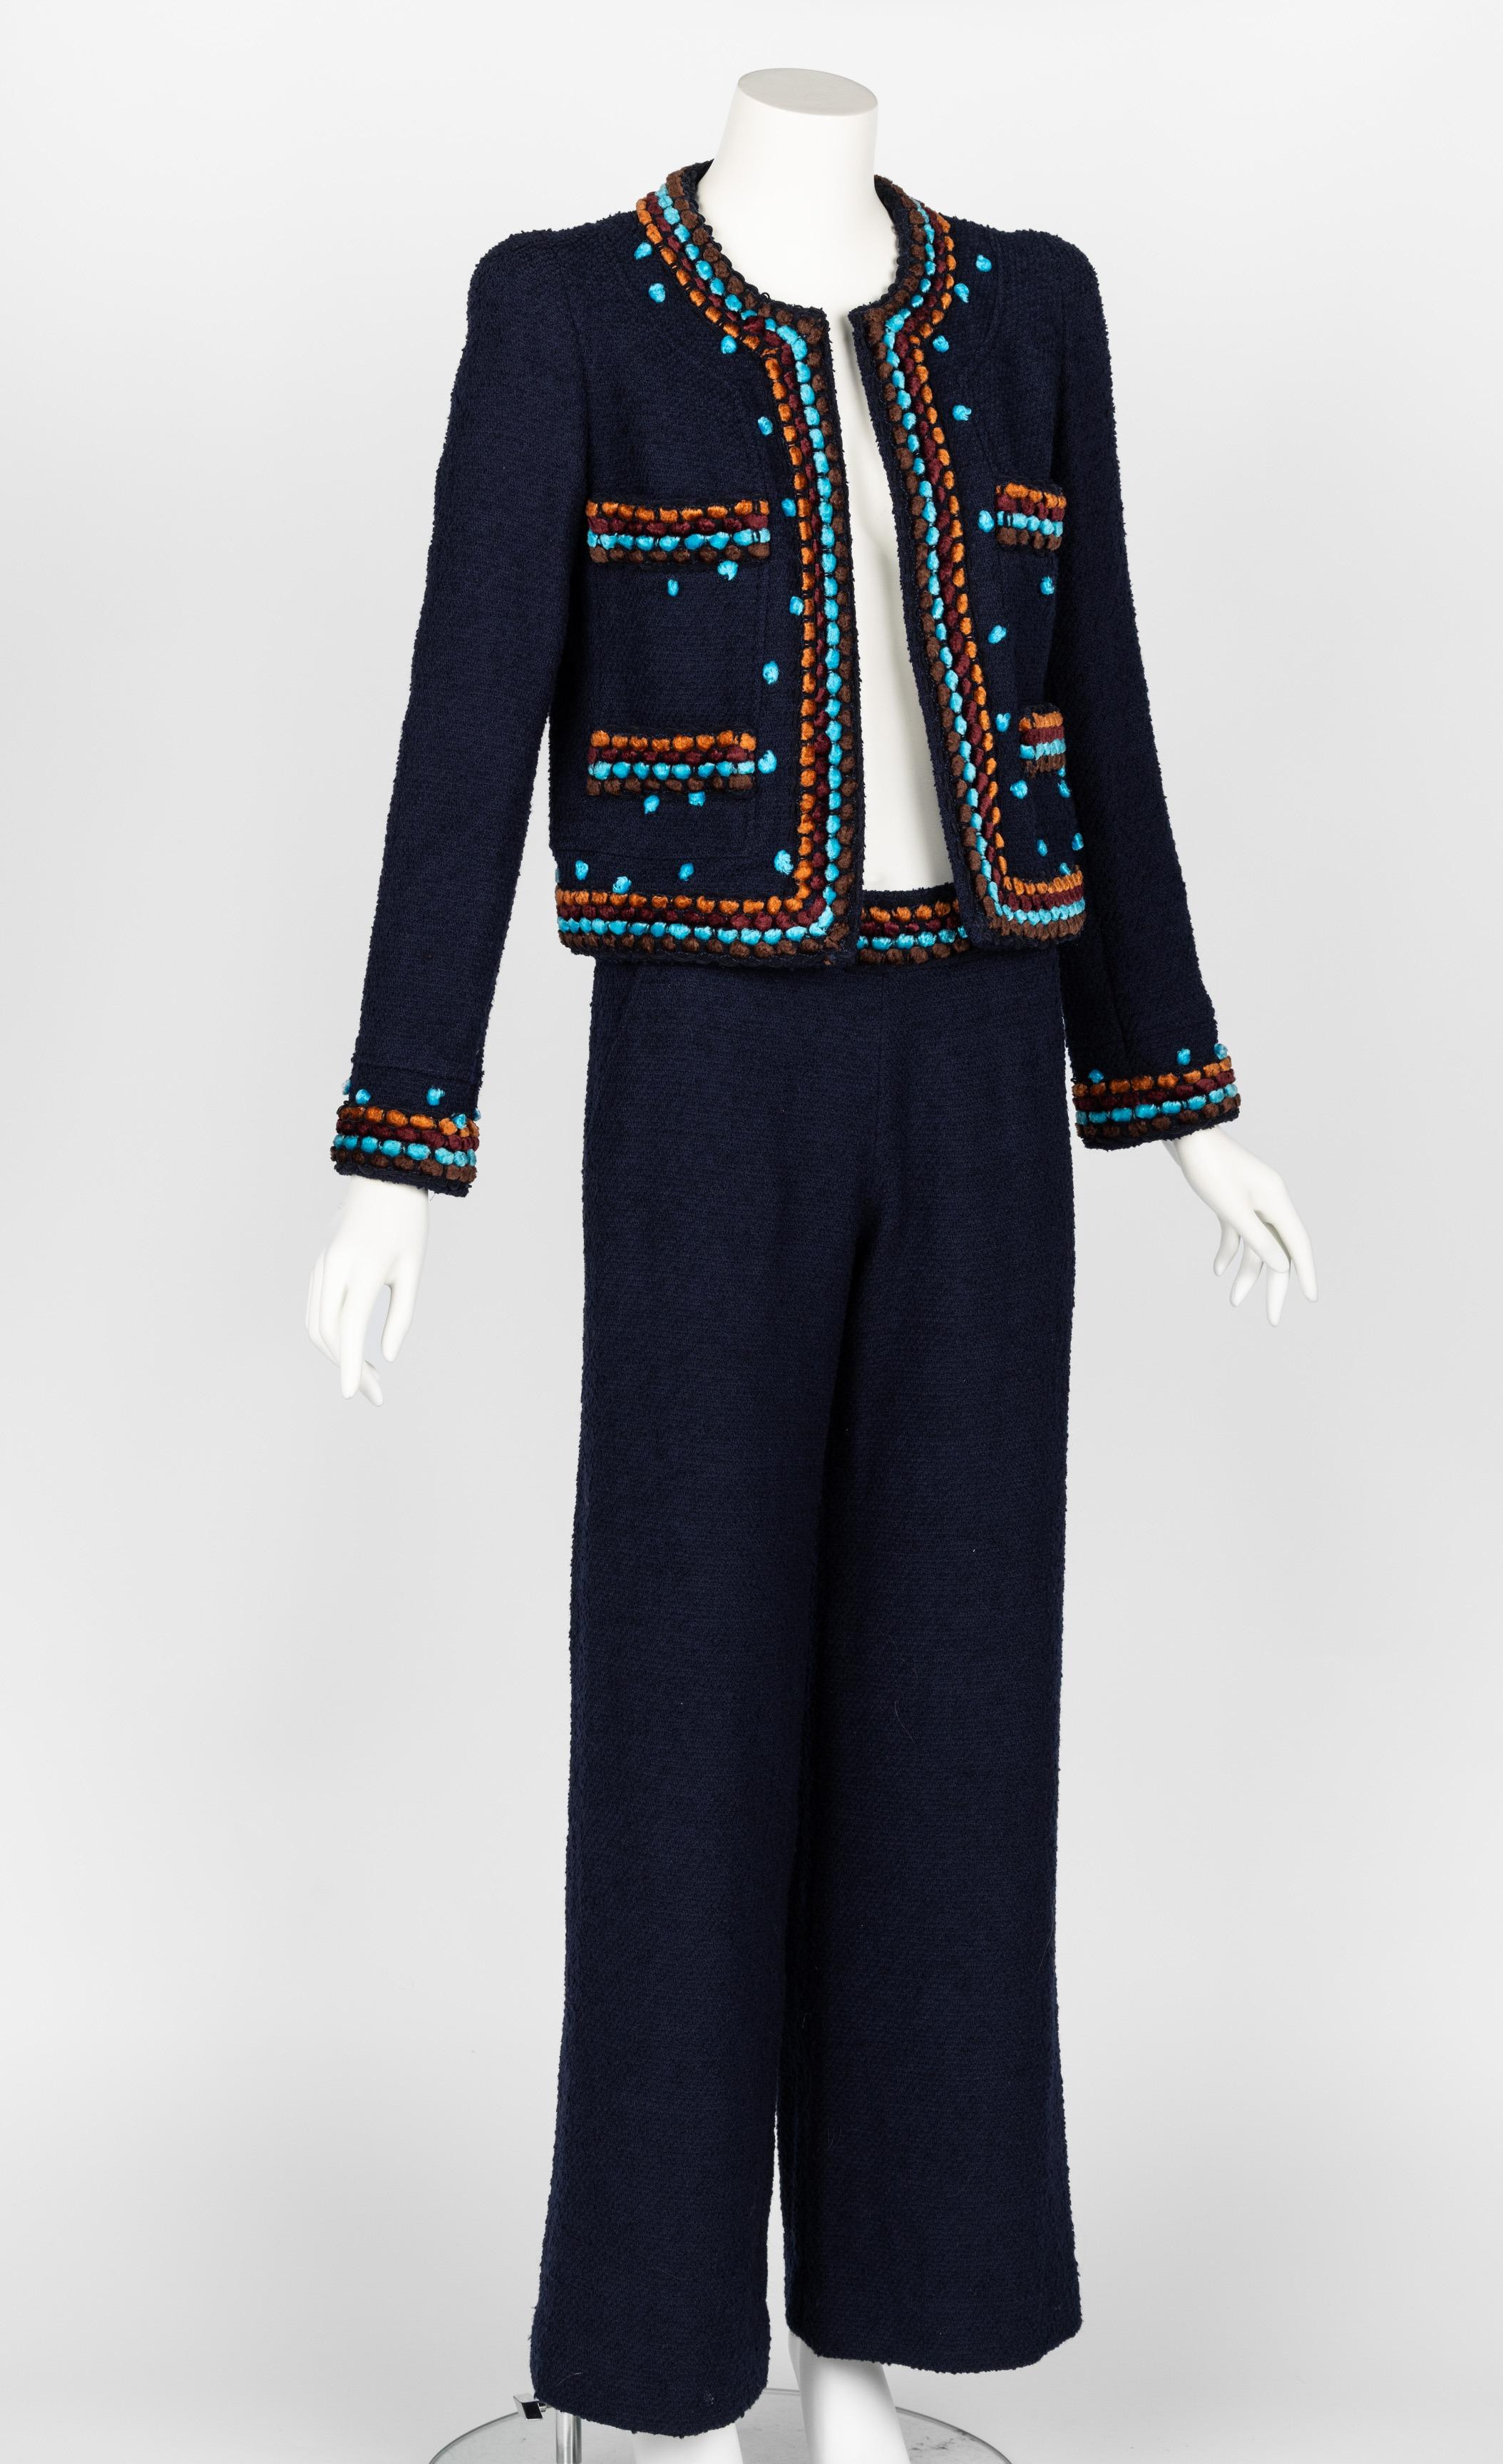 Chanel runway fall 1997 jacket and pants set.
Cropped jacket with chenille trim in brown, burgundy, orange, and turquoise.
Lightly padded shoulders, gunmetal chain weight at the interior hem of the jacket.
Jacket fully lined in CC navy silk logo